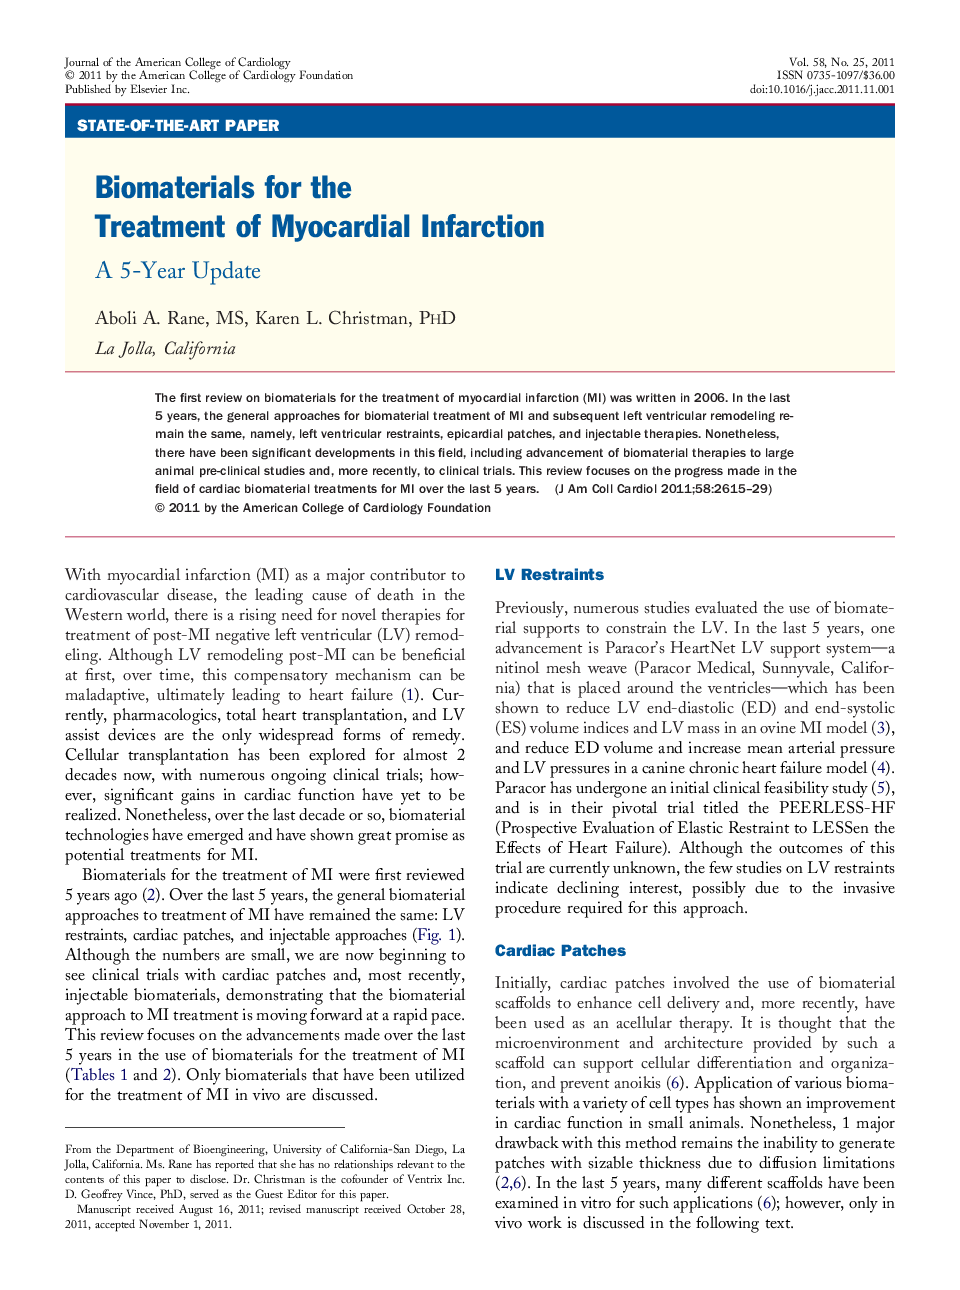 Biomaterials for the Treatment of Myocardial Infarction : A 5-Year Update